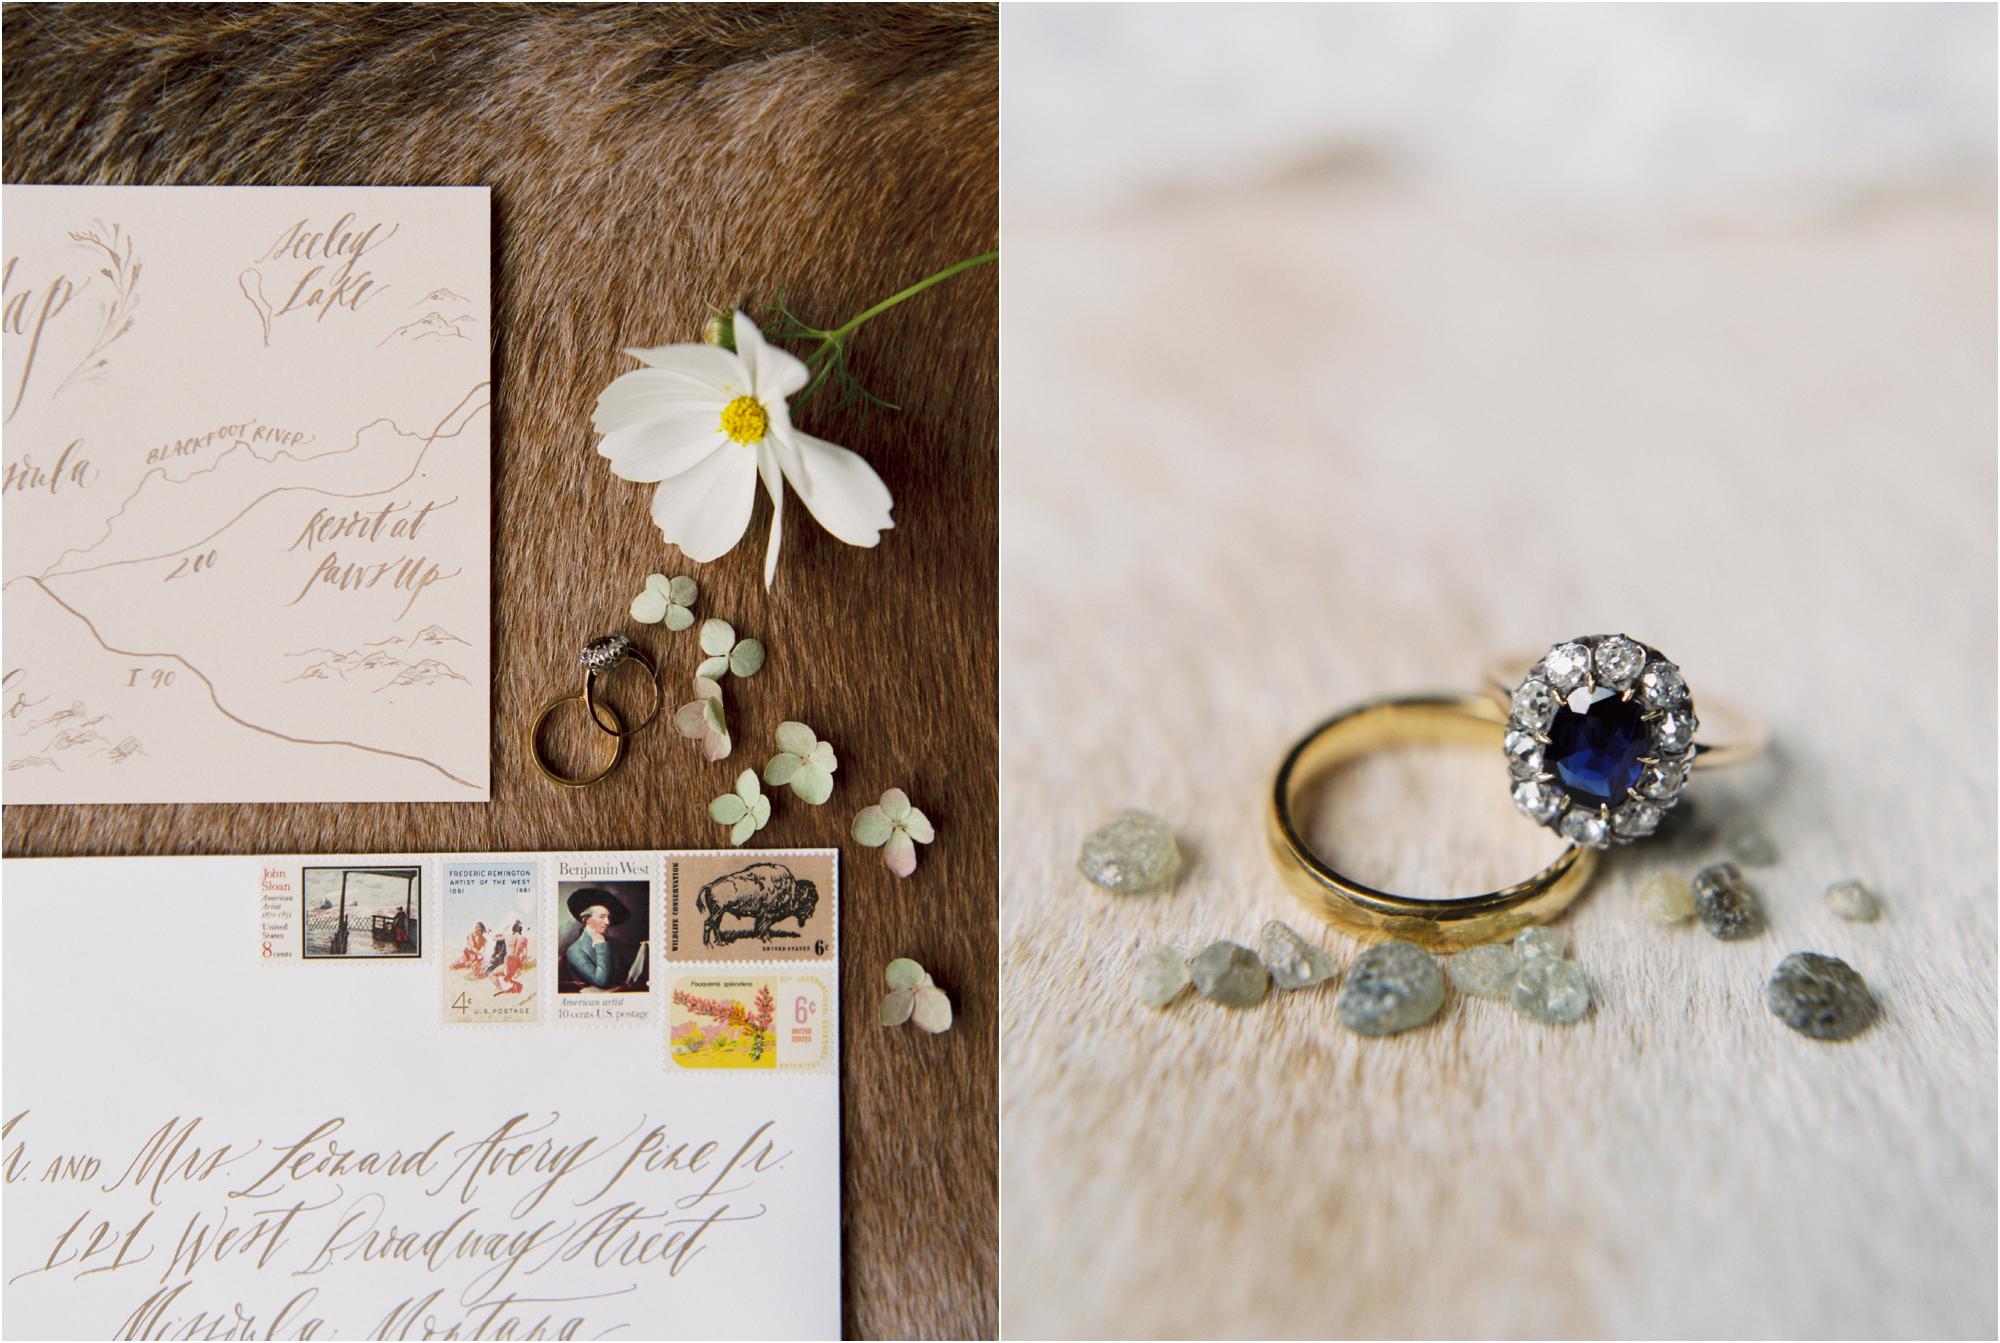  Legends of the Fall inspired Montana Wedding at the Resort at Paws Up  Design and Florals by Greenwood Events  http://www.greenwood.events/   &nbsp;©Jeremiah and Rachel Photography  http://jeremiahandrachel.com  